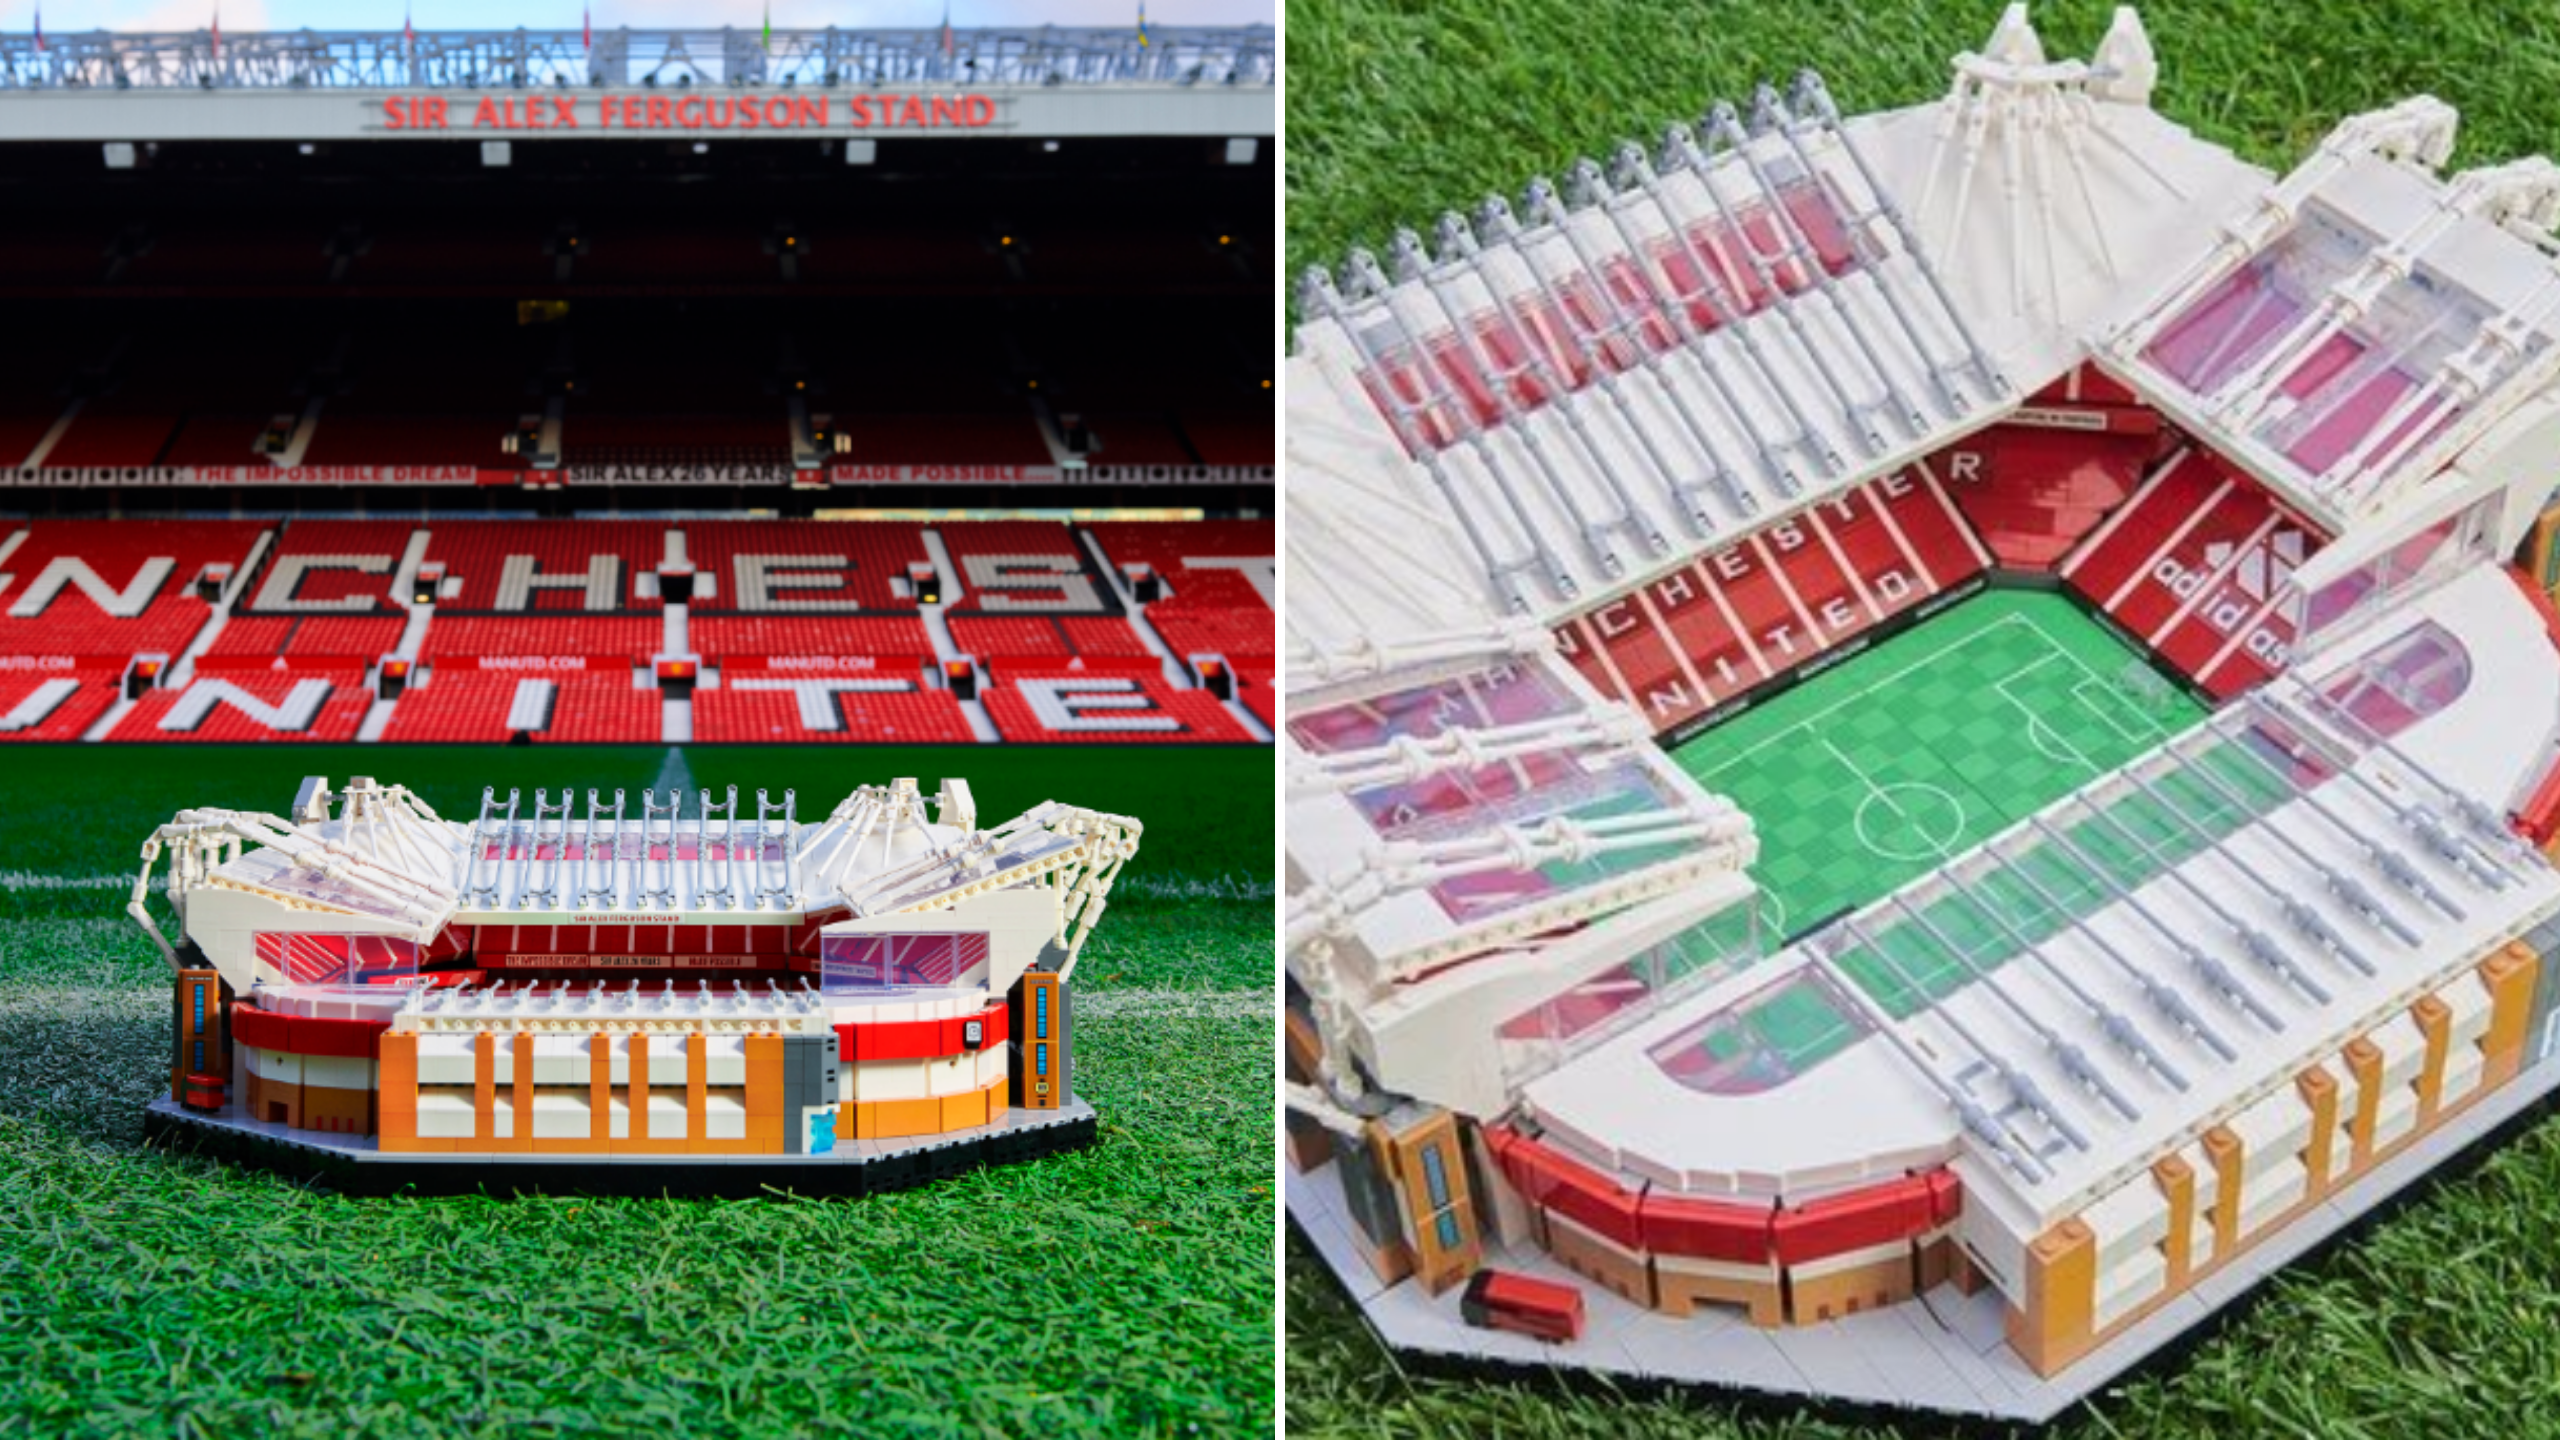 Lego Are Releasing A 3898-piece Set Of Old Trafford , HD Wallpaper & Backgrounds